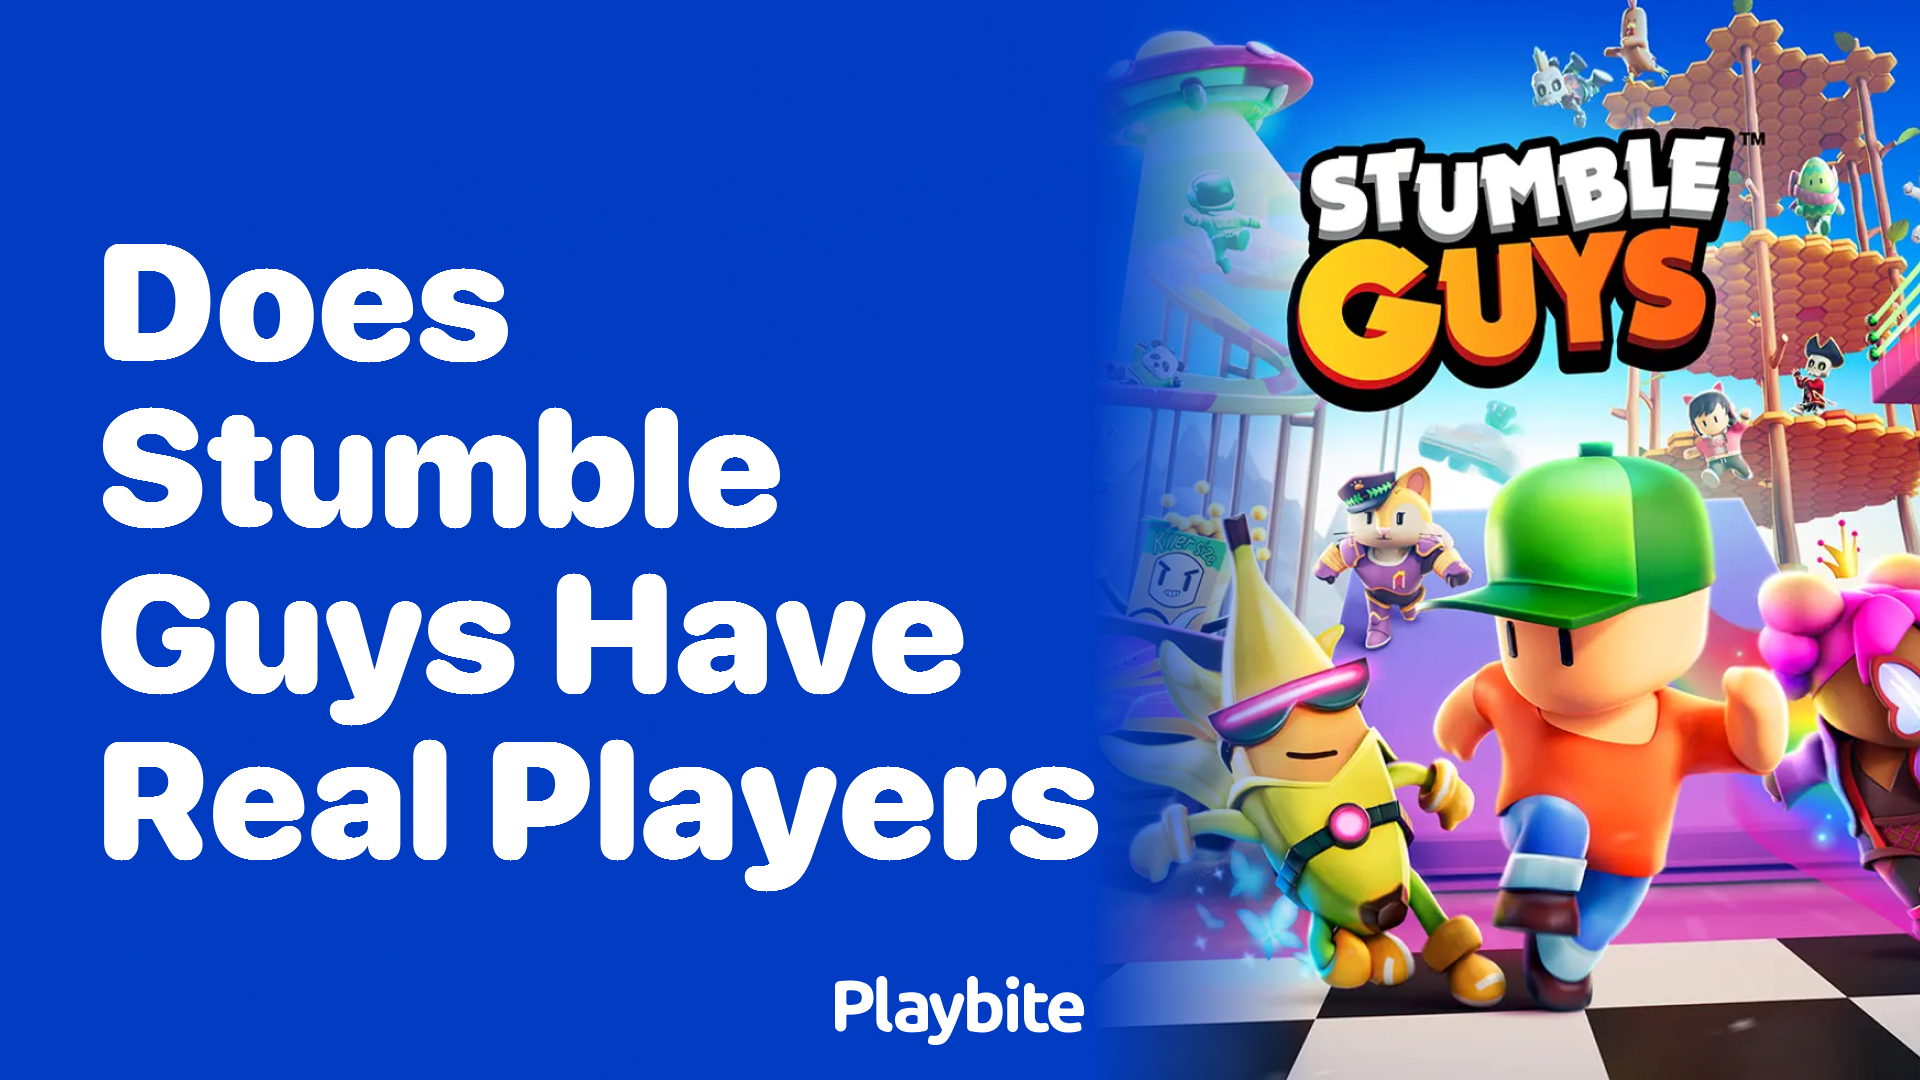 Does Stumble Guys Have Real Players? Let&#8217;s Find Out!